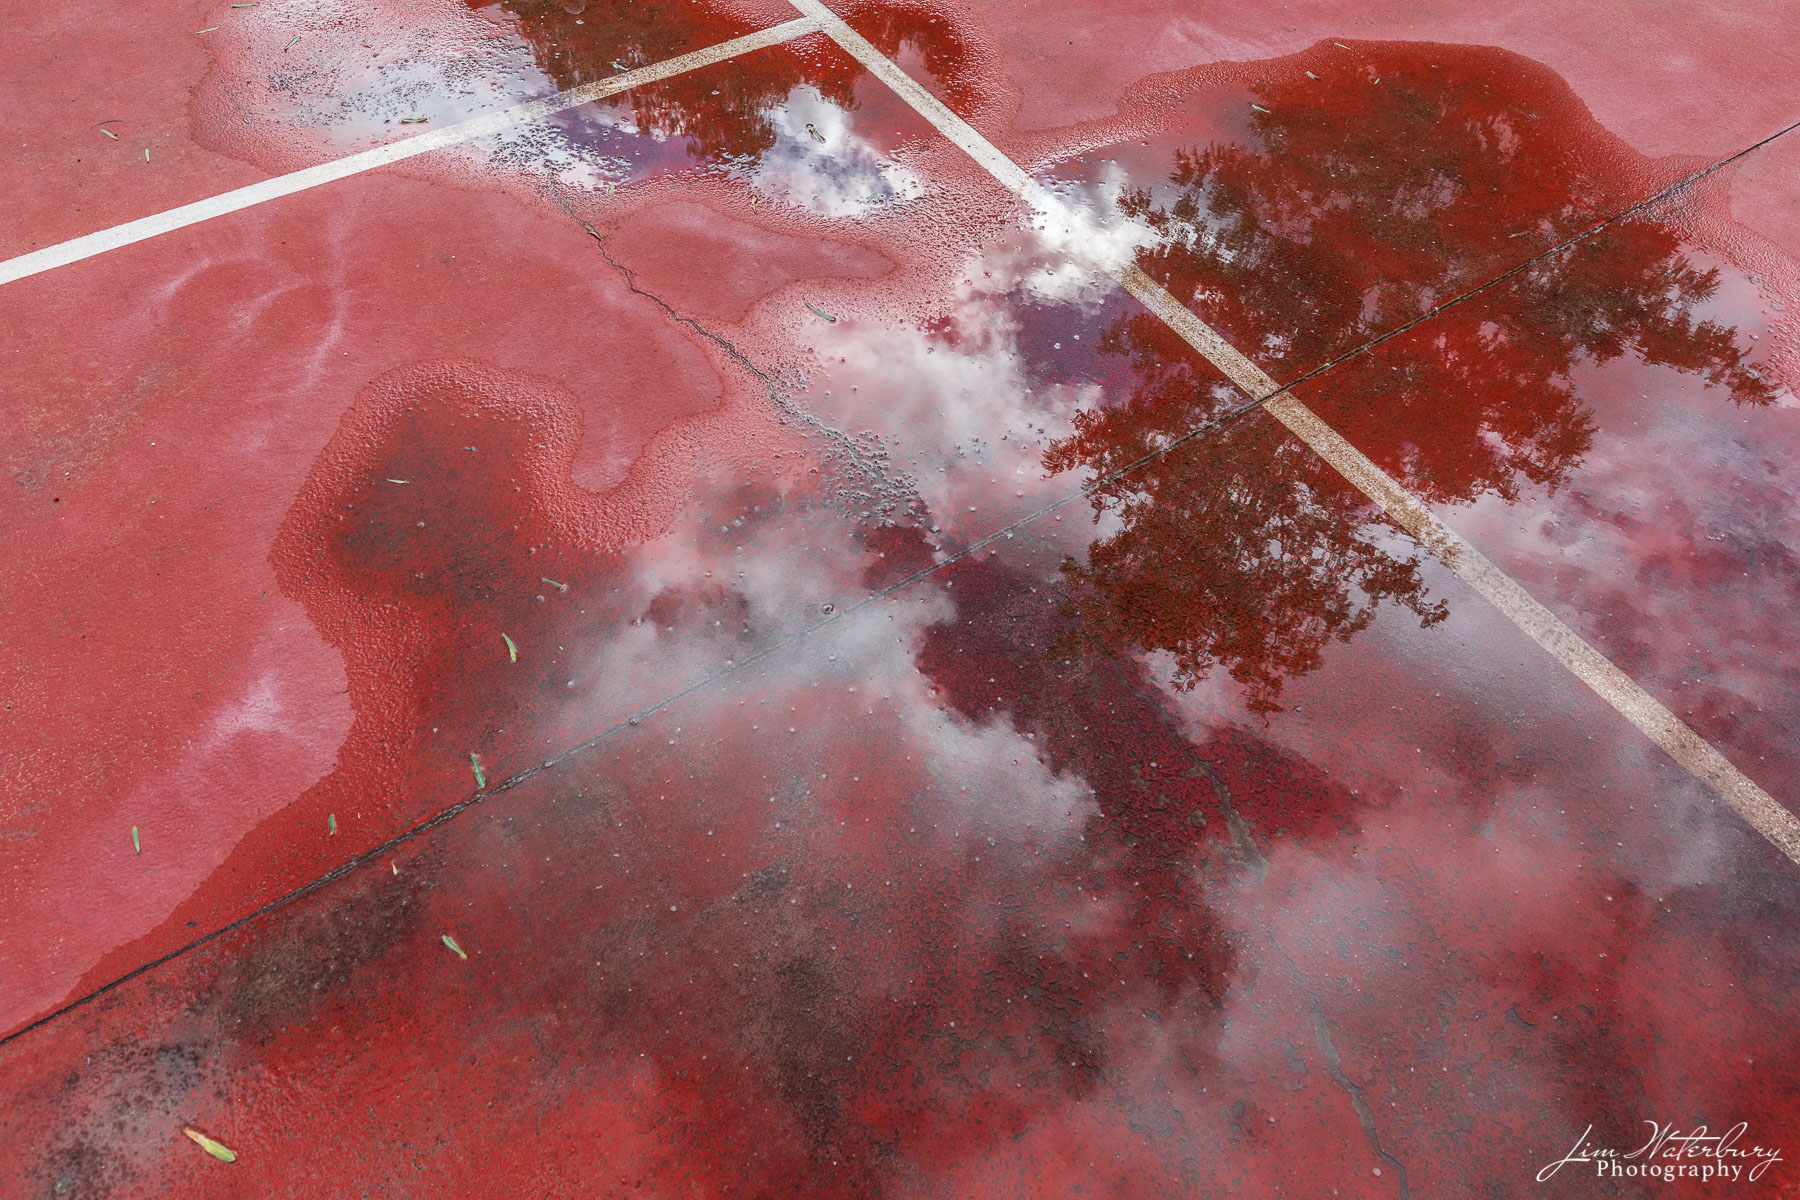 Sky and clouds reflect in rain puddles on a red, hard tennis court at a hacienda outside San Miguel de Allende, Mexico